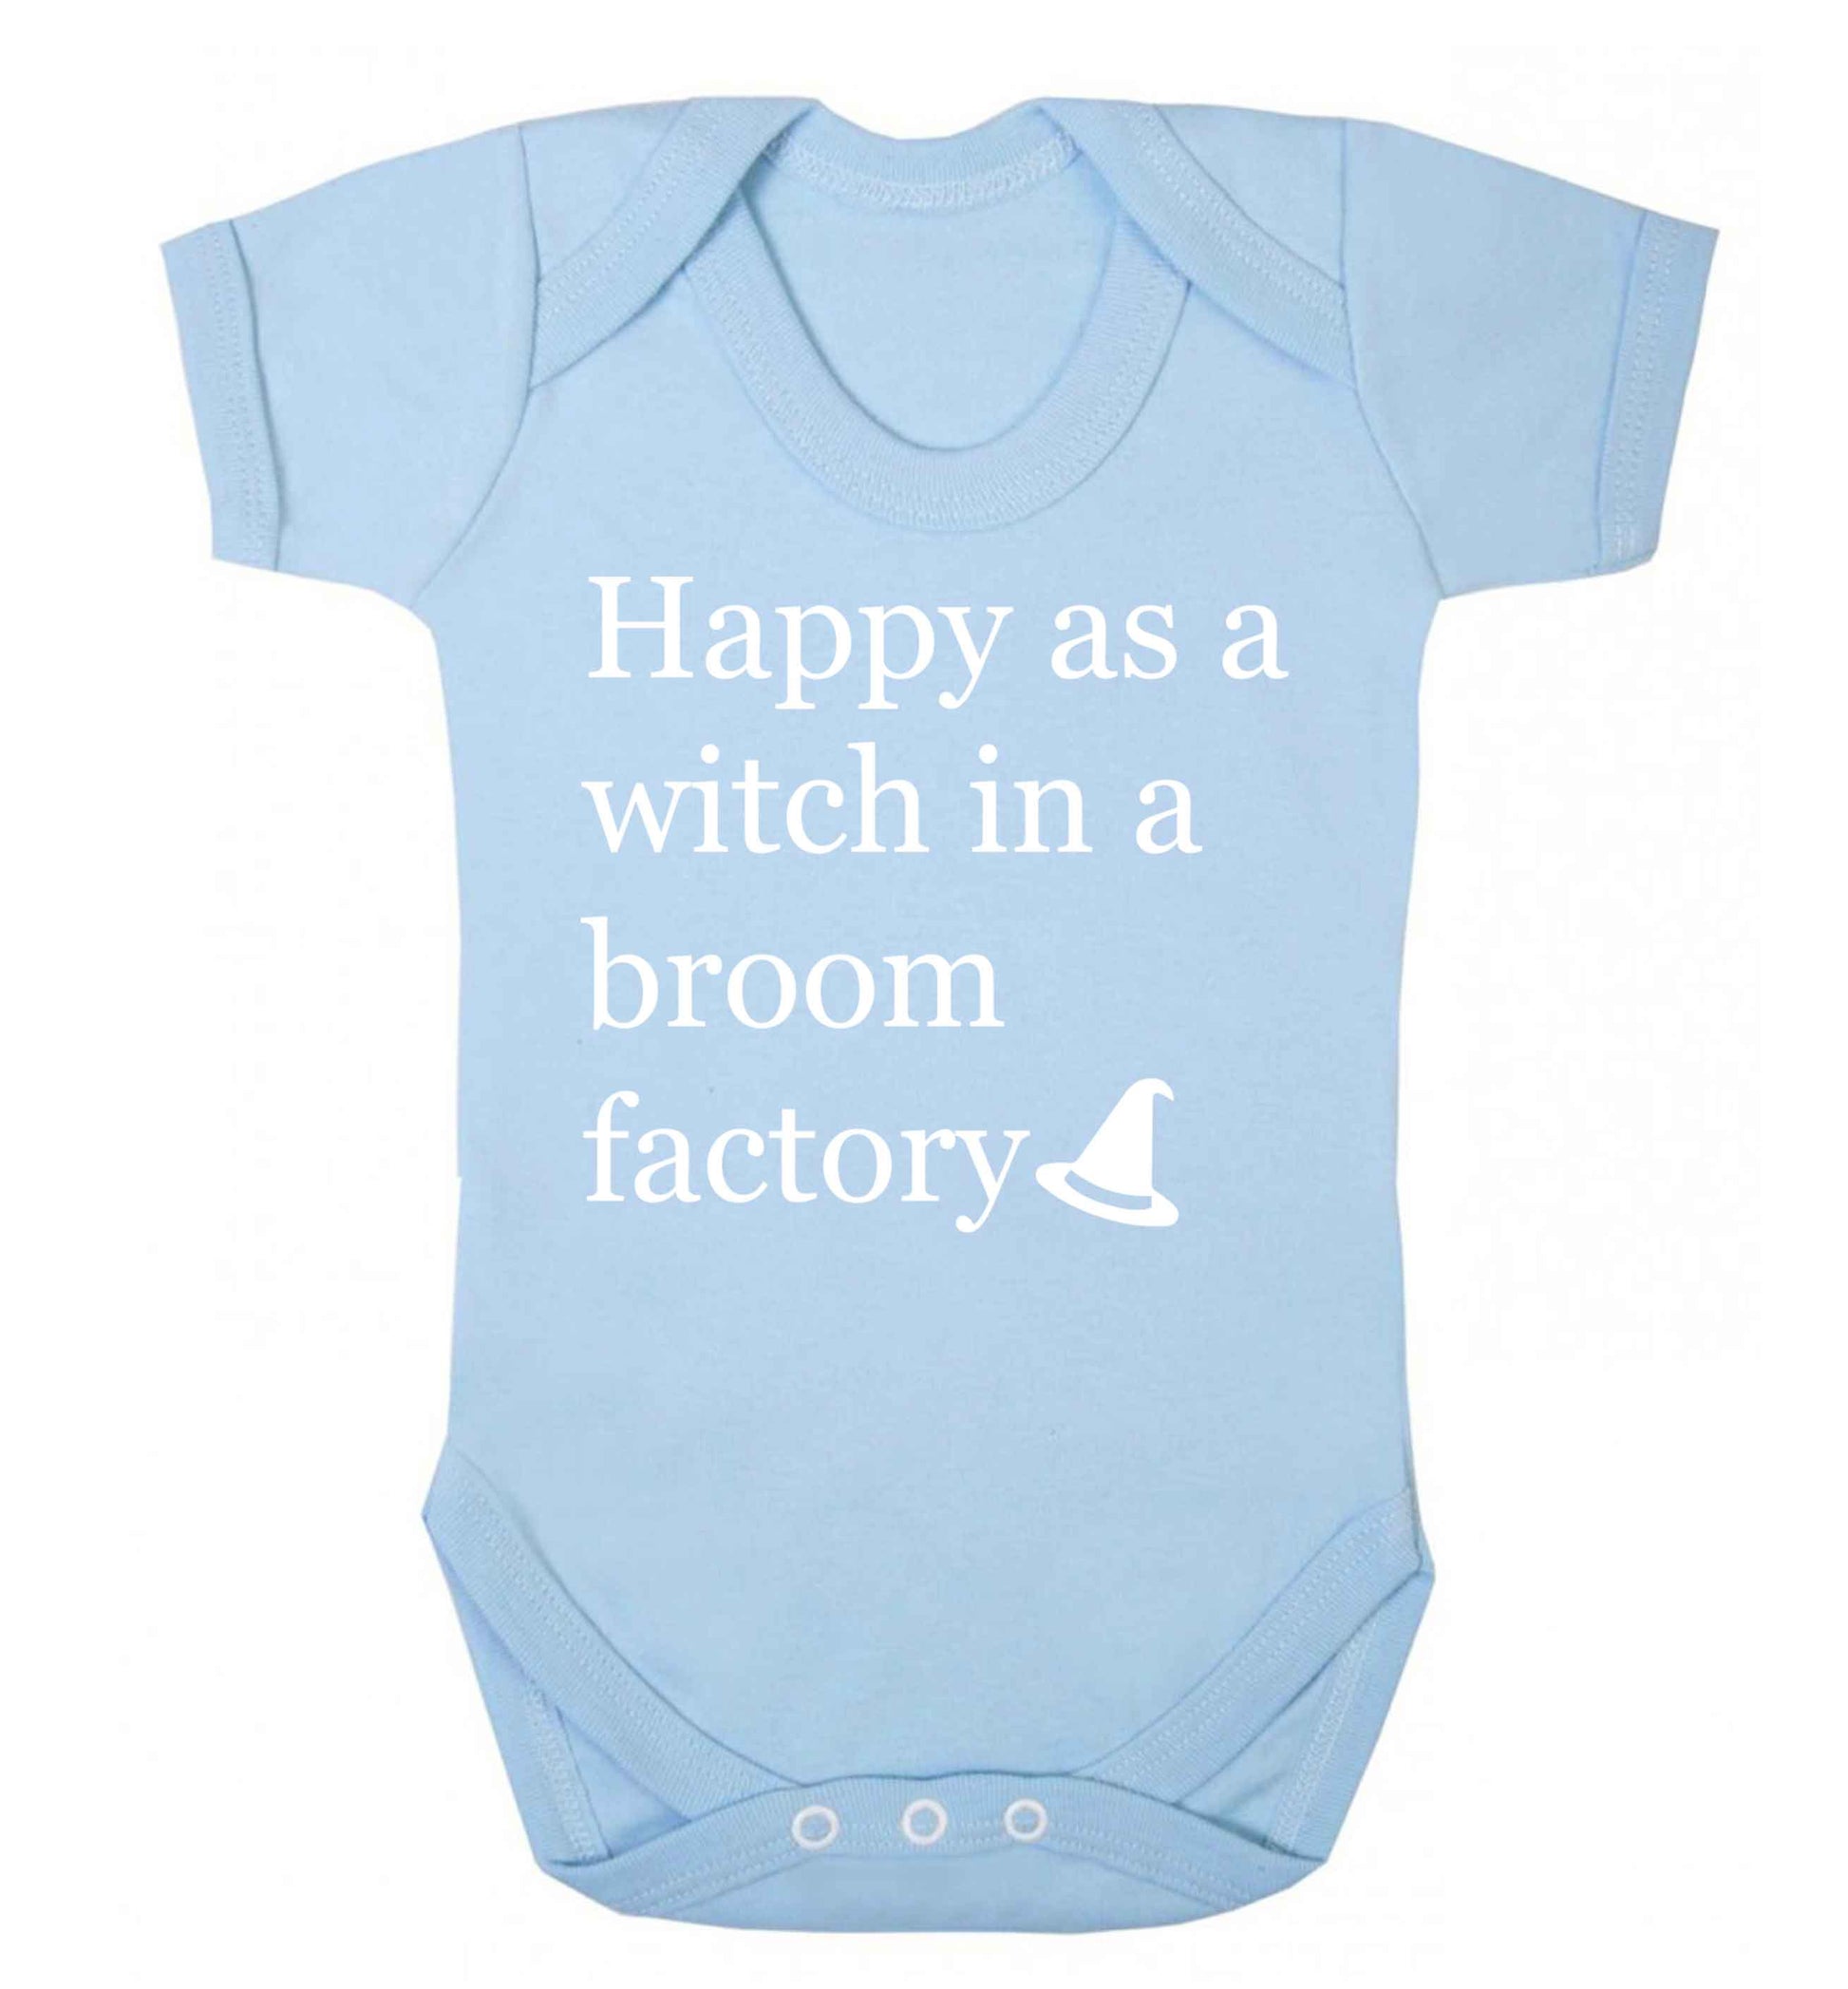 Happy as a witch in a broom factory Baby Vest pale blue 18-24 months